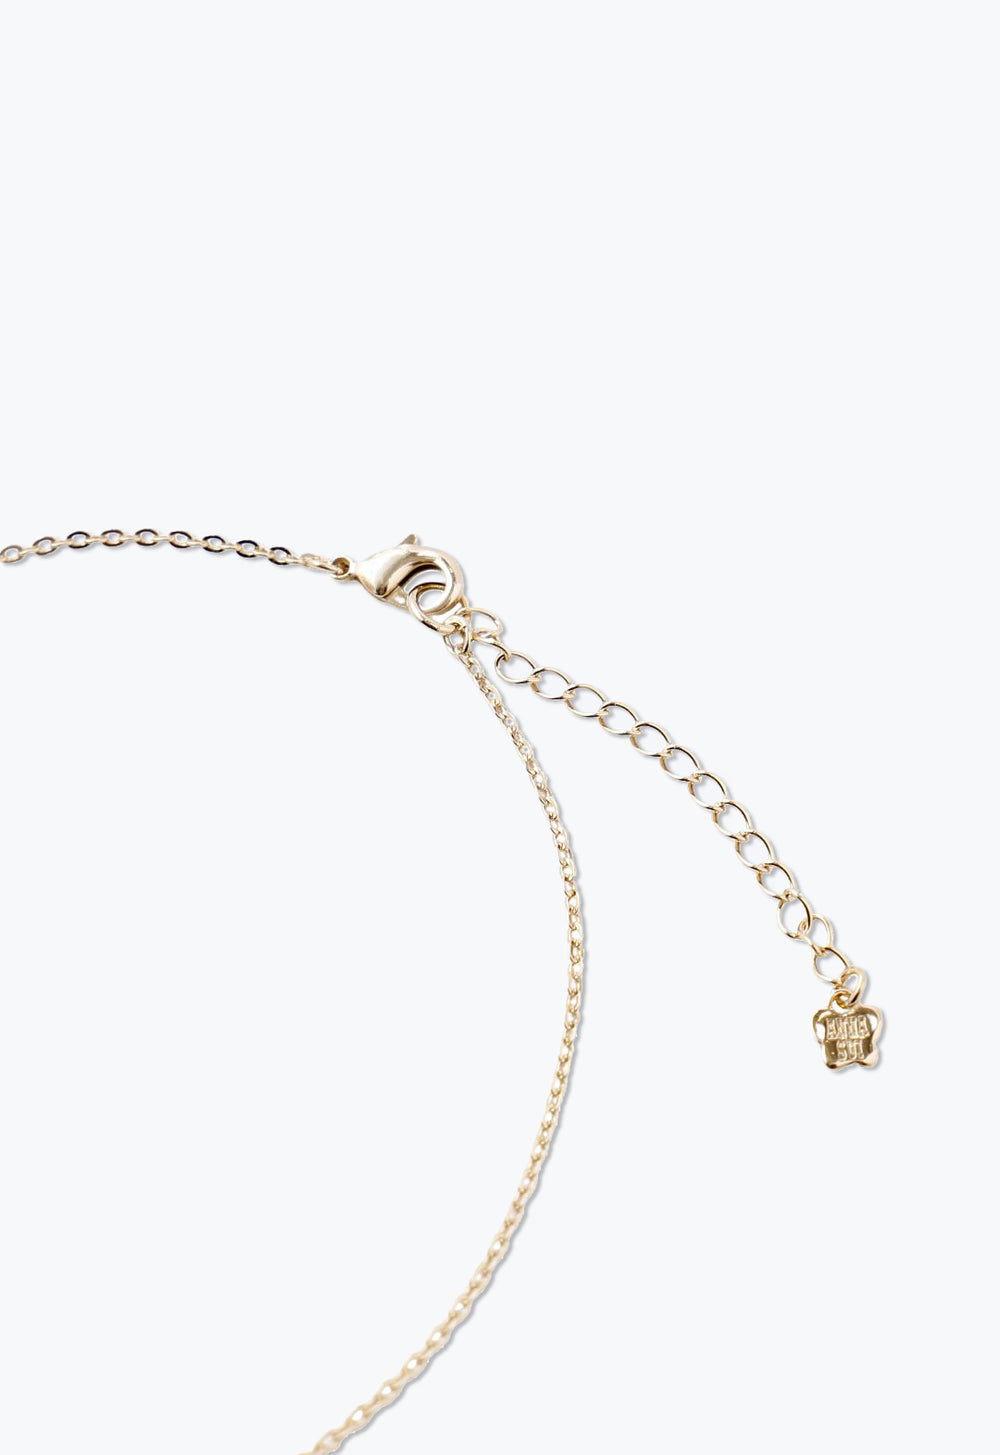 Gold chain, a lobster claw clasp with large links for adjustability, Anna Sui imprint on a tag